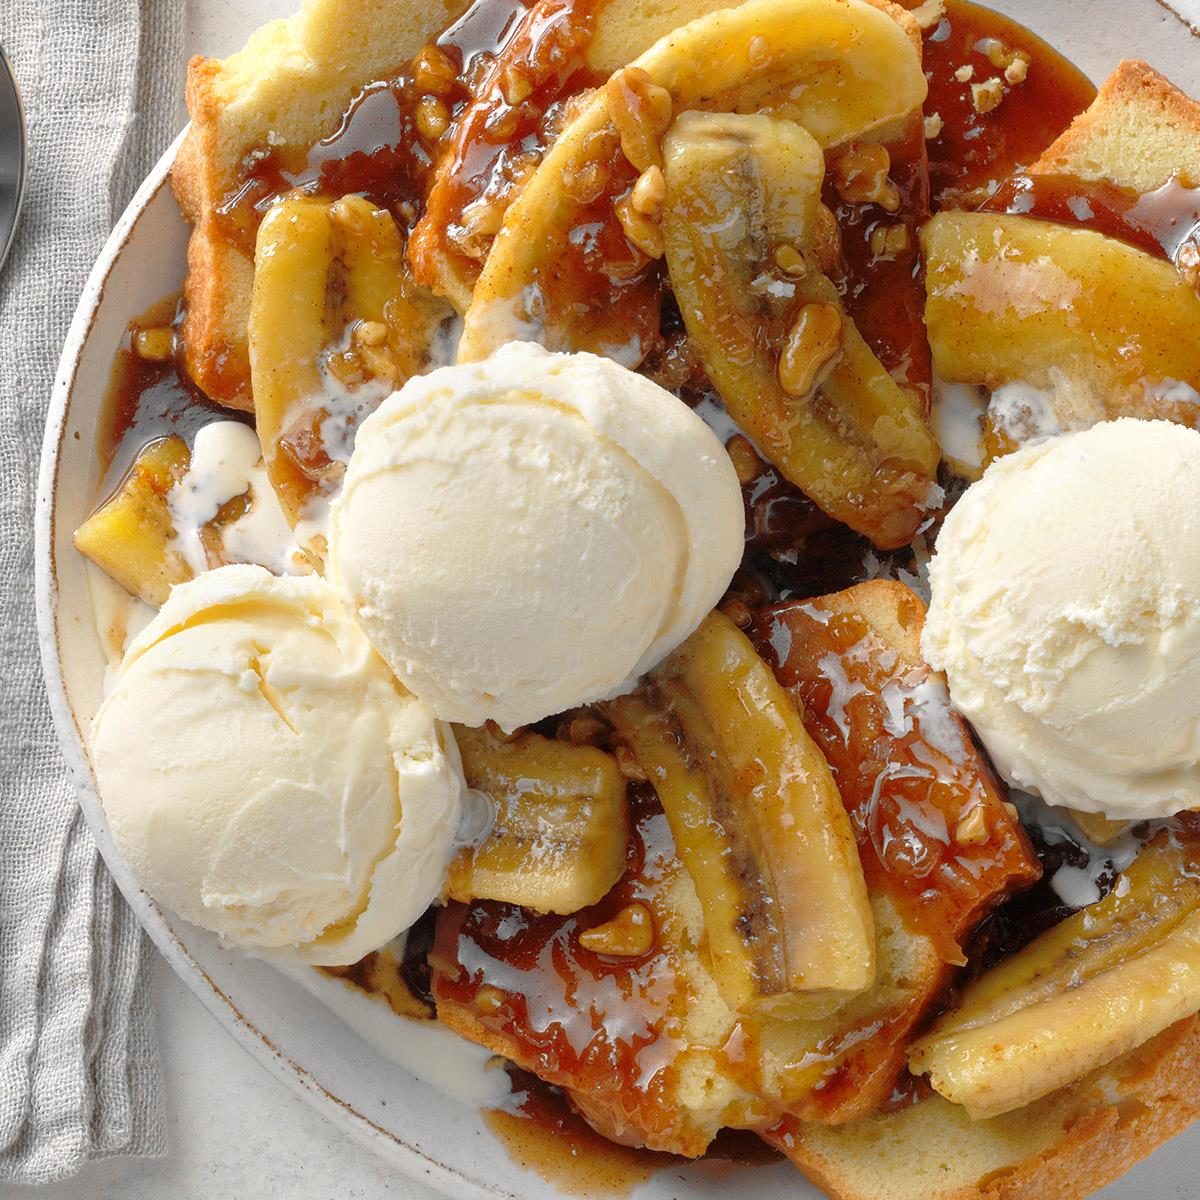 Day 19: Slow-Cooker Bananas Foster